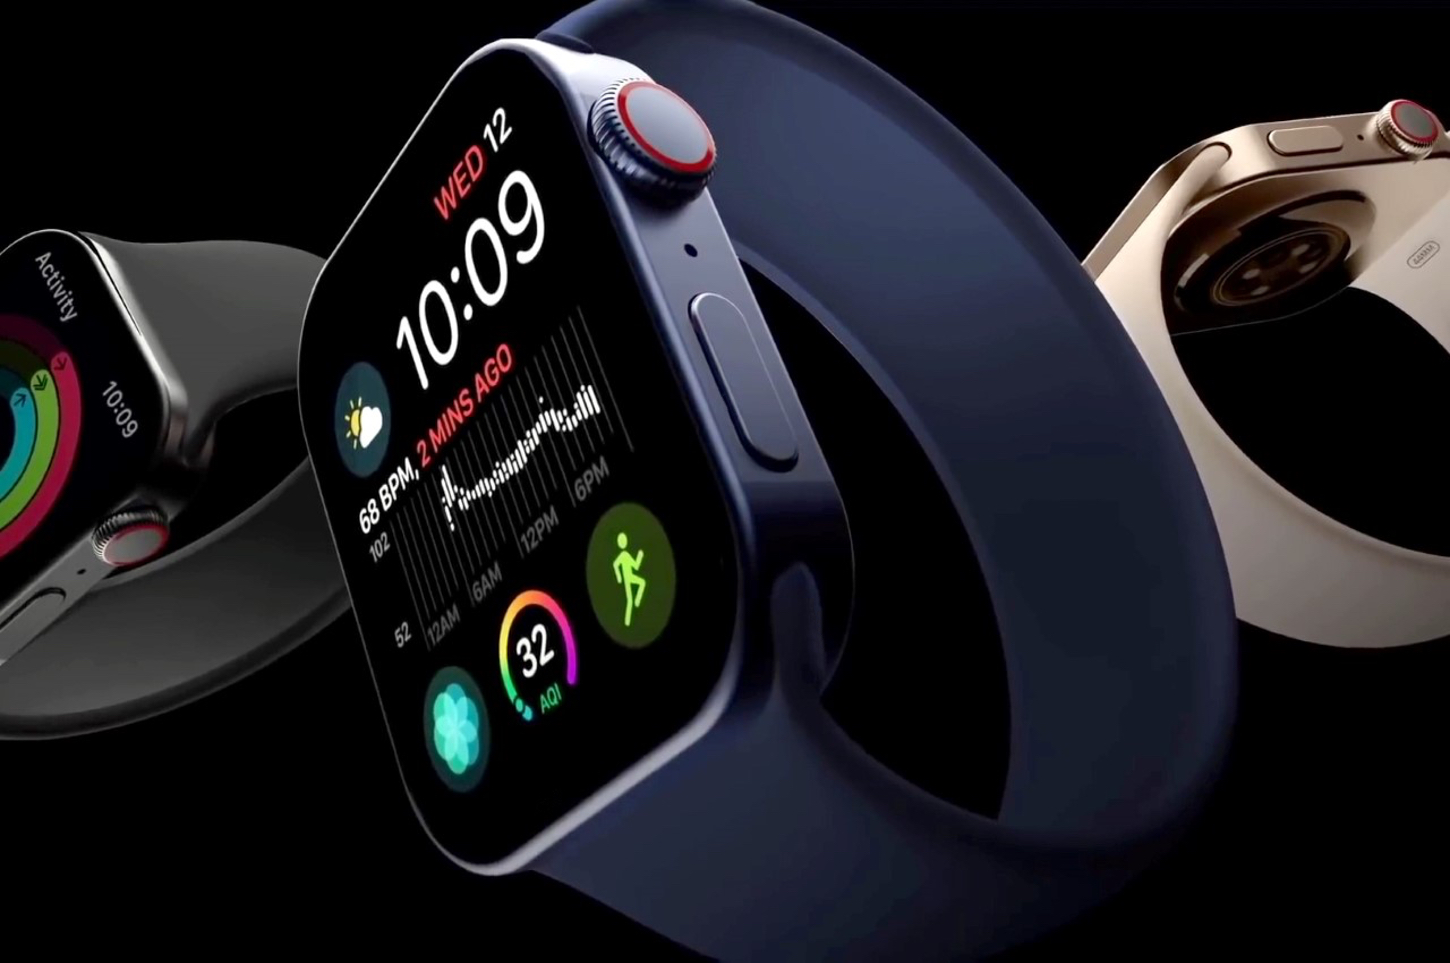 Introducing the New Apple Watch Series 7